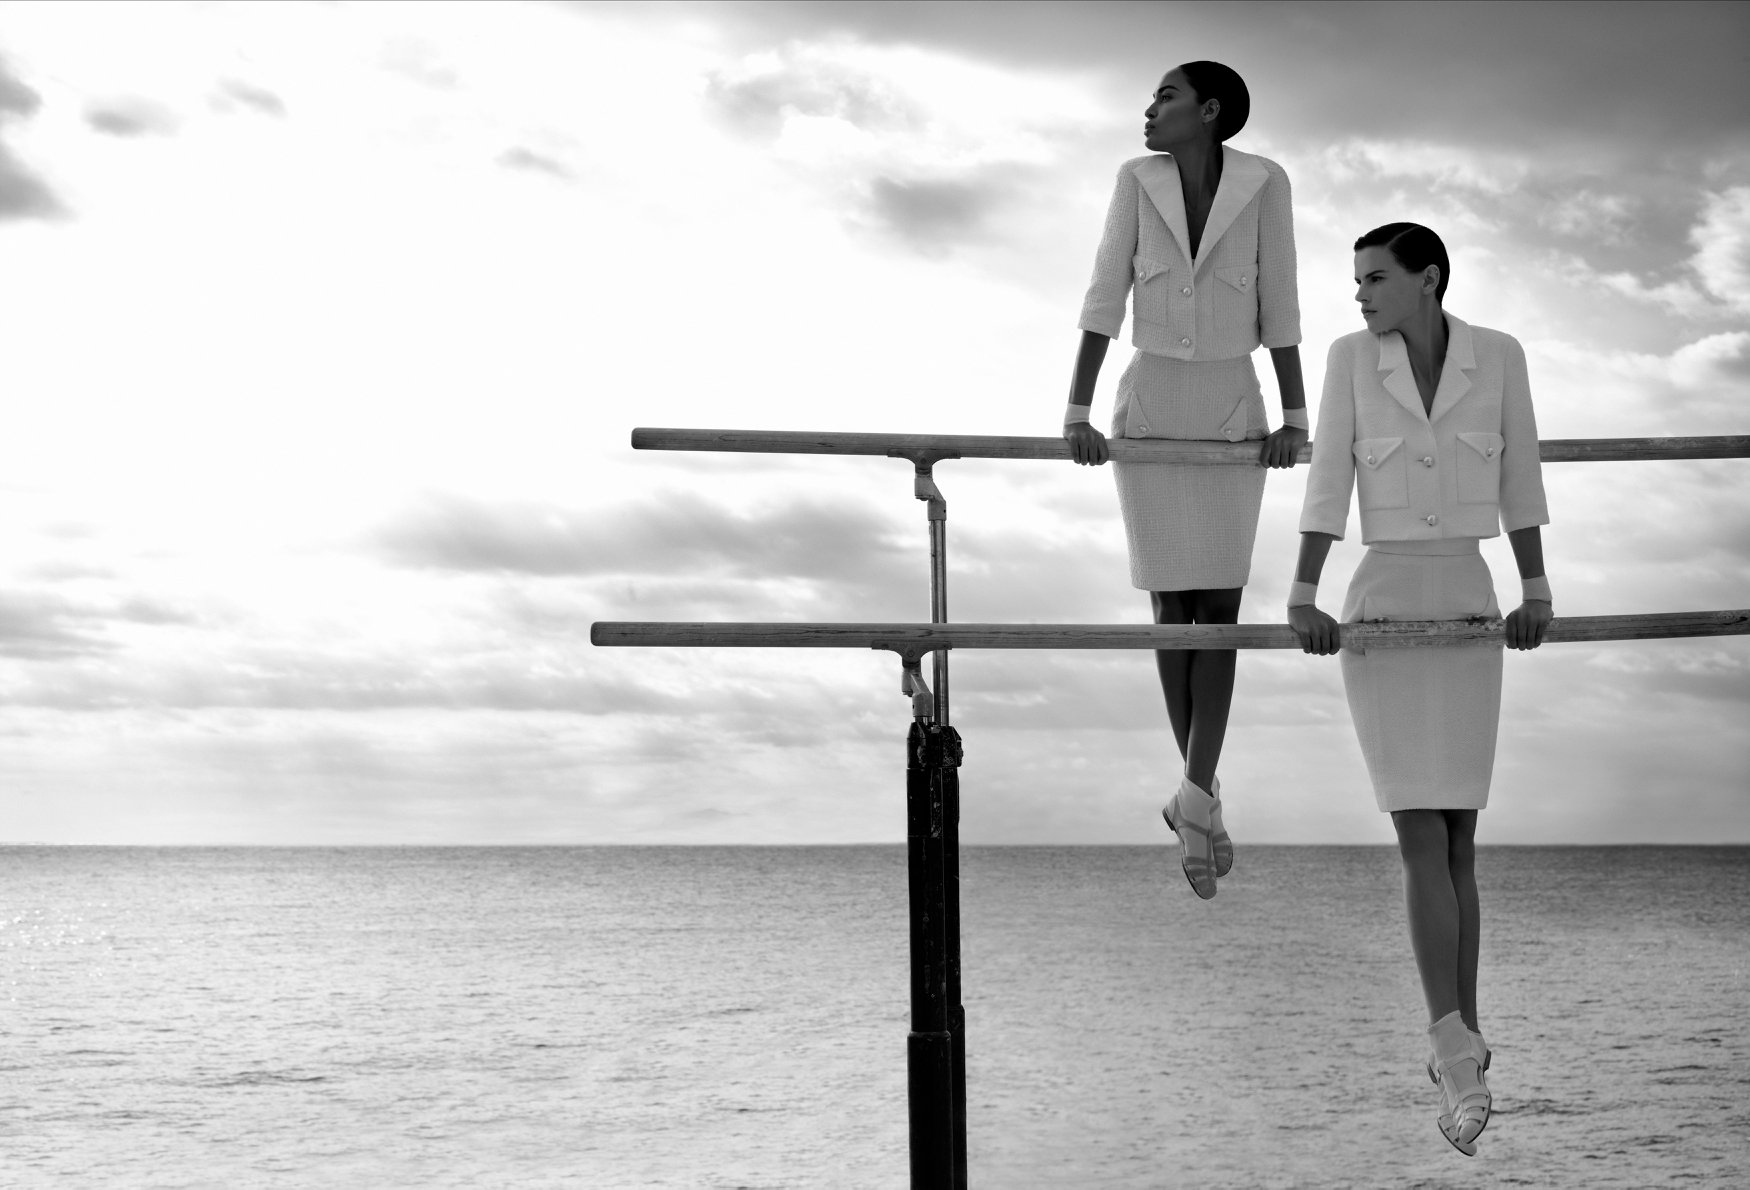 CHANEL Holidays, a summer retrospective. Photographed by Karl Lagerfeld in Antibes, starring Saskia de Brauw and Joan Smalls.